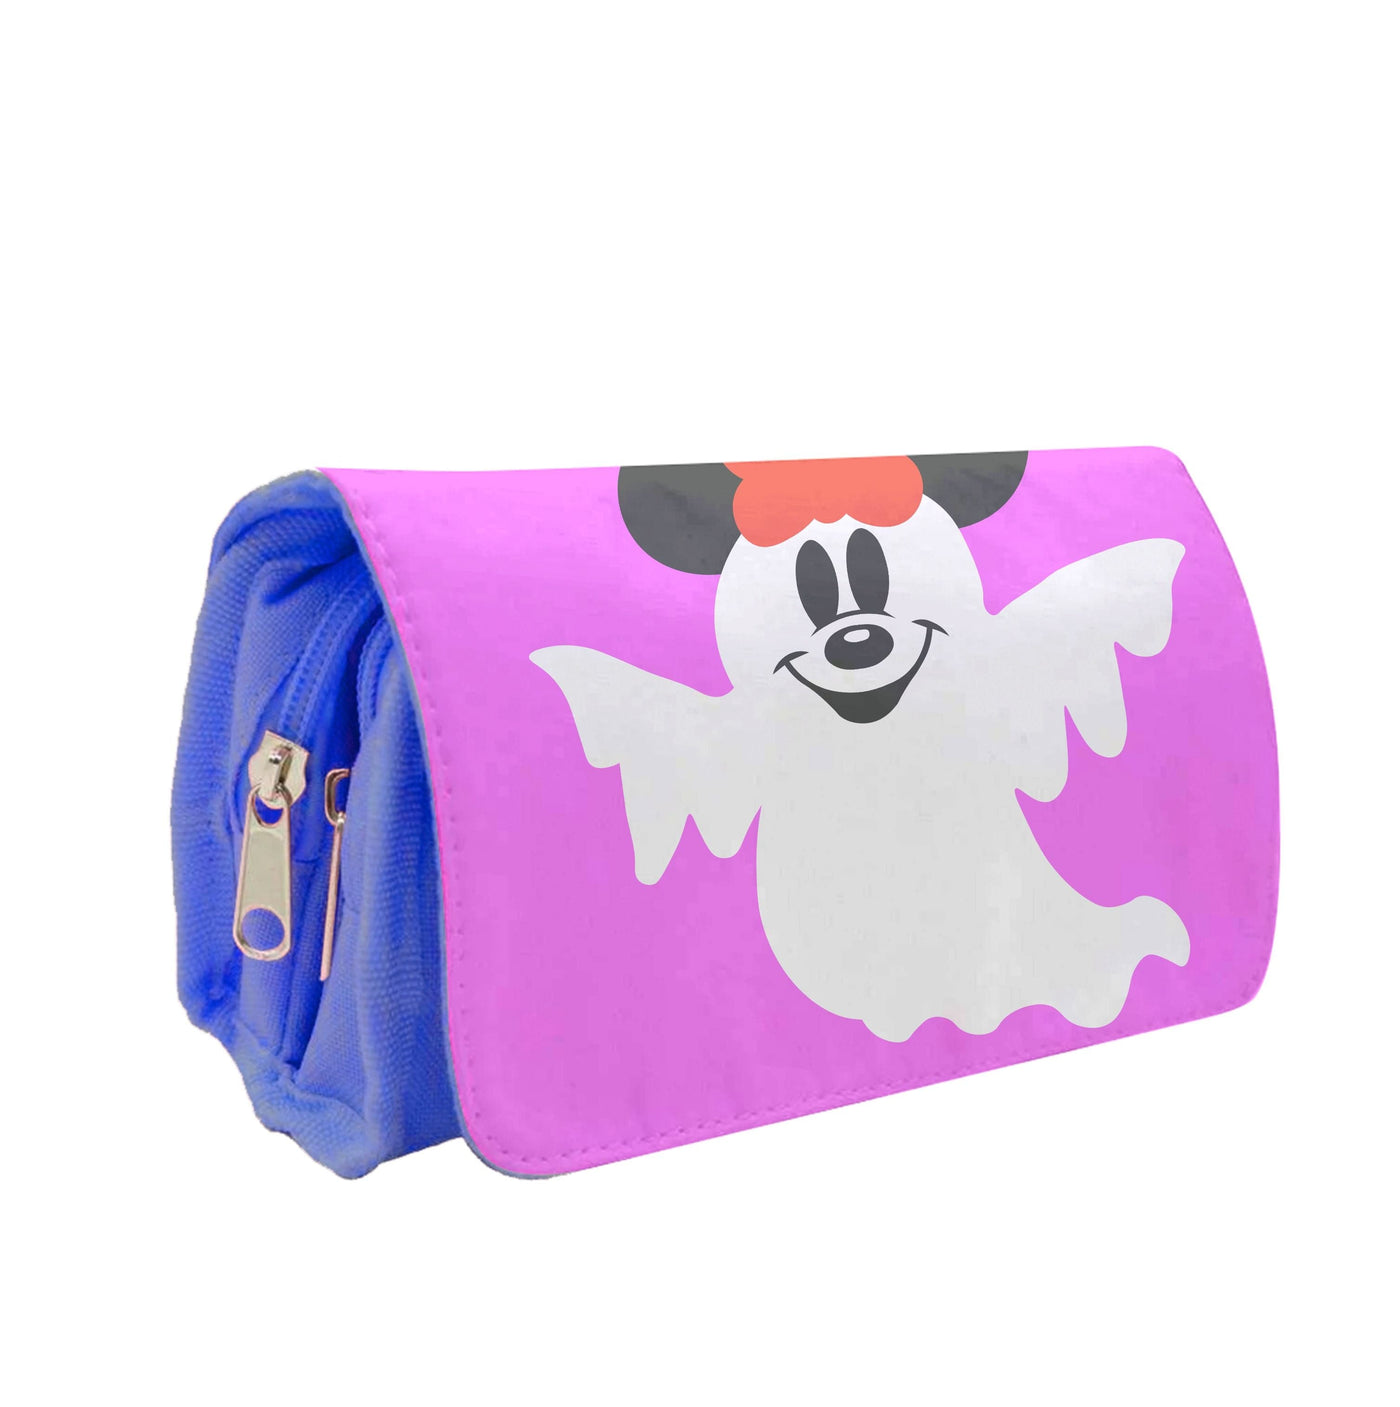 Minnie Mouse Ghost - Disney Halloween Pencil Case